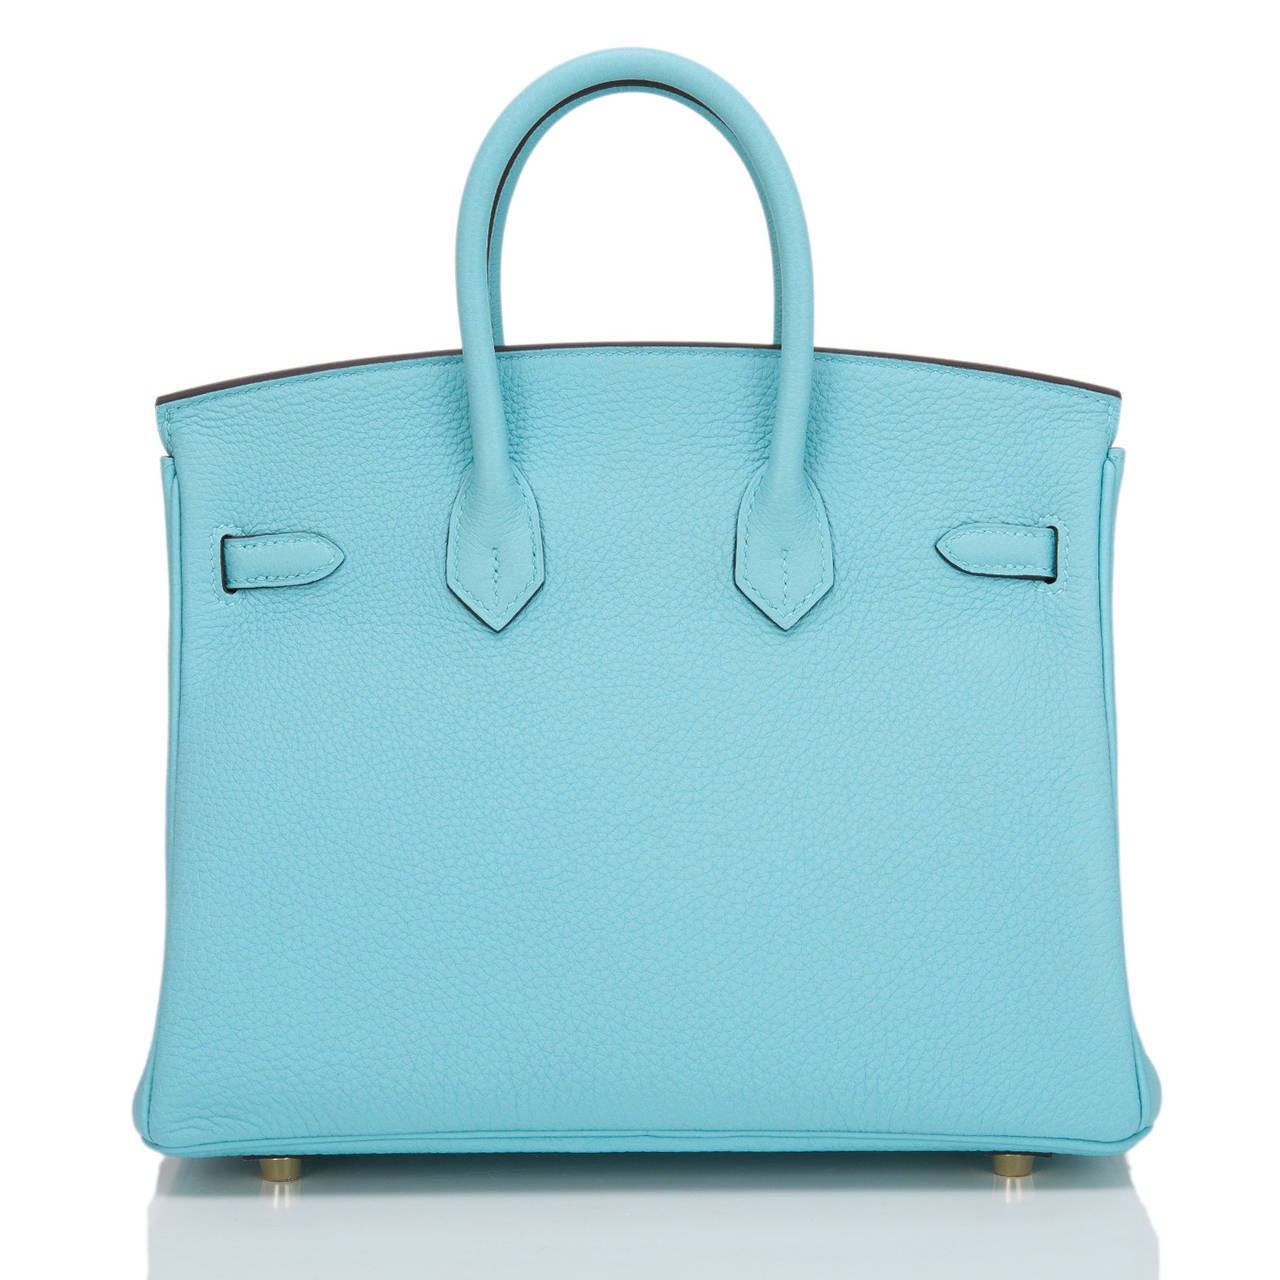 Hermes Blue Atoll Togo Birkin 25cm Gold Hardware In New Condition For Sale In New York, NY